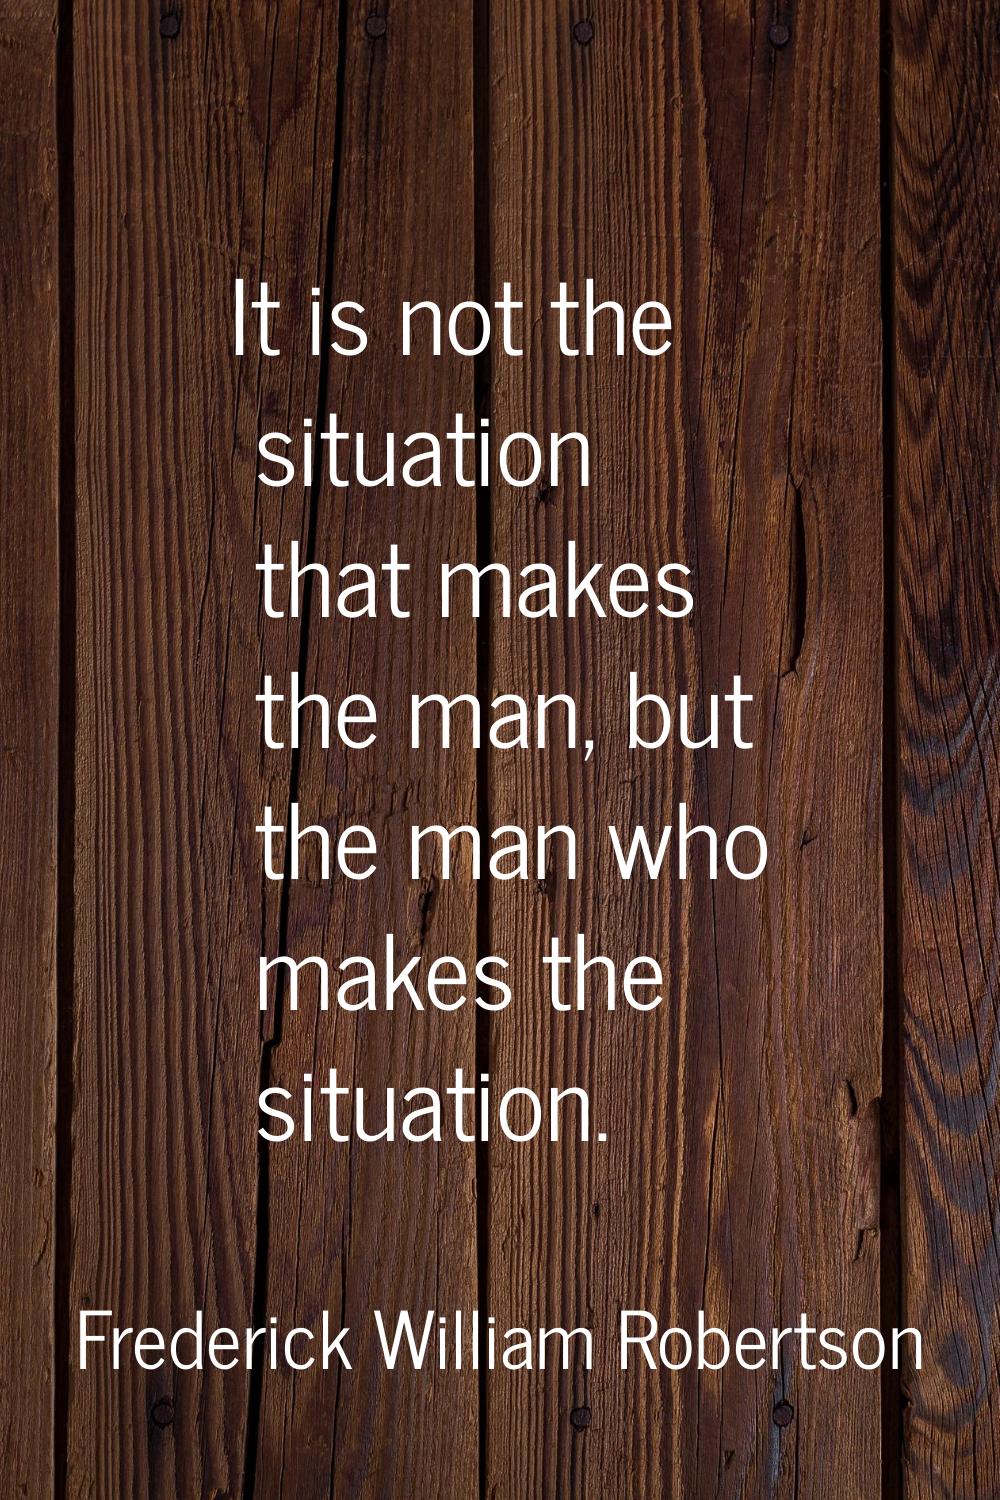 It is not the situation that makes the man, but the man who makes the situation.